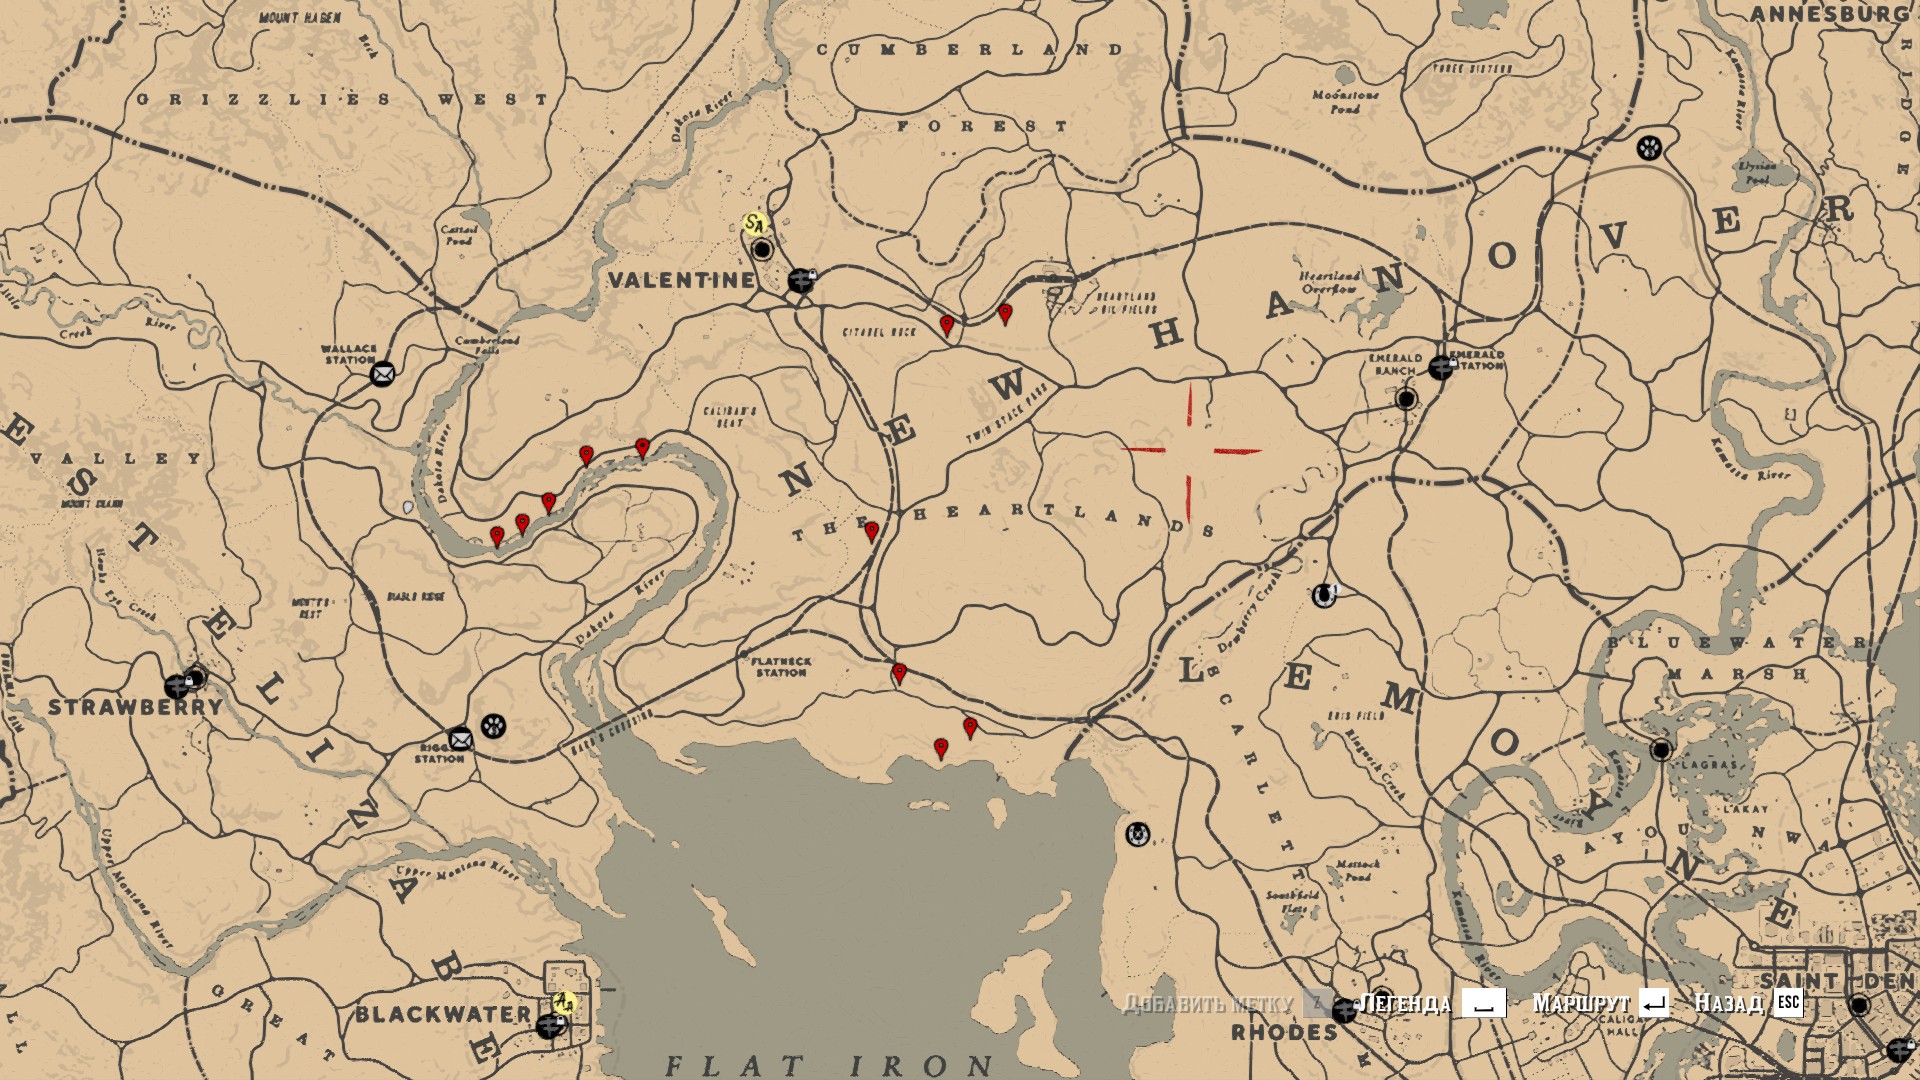 Red Dead Redemption 2 - Mint and Creeping Thyme Map Locations - Mint and Creeping thyme locations (that I found) - CAC49CE